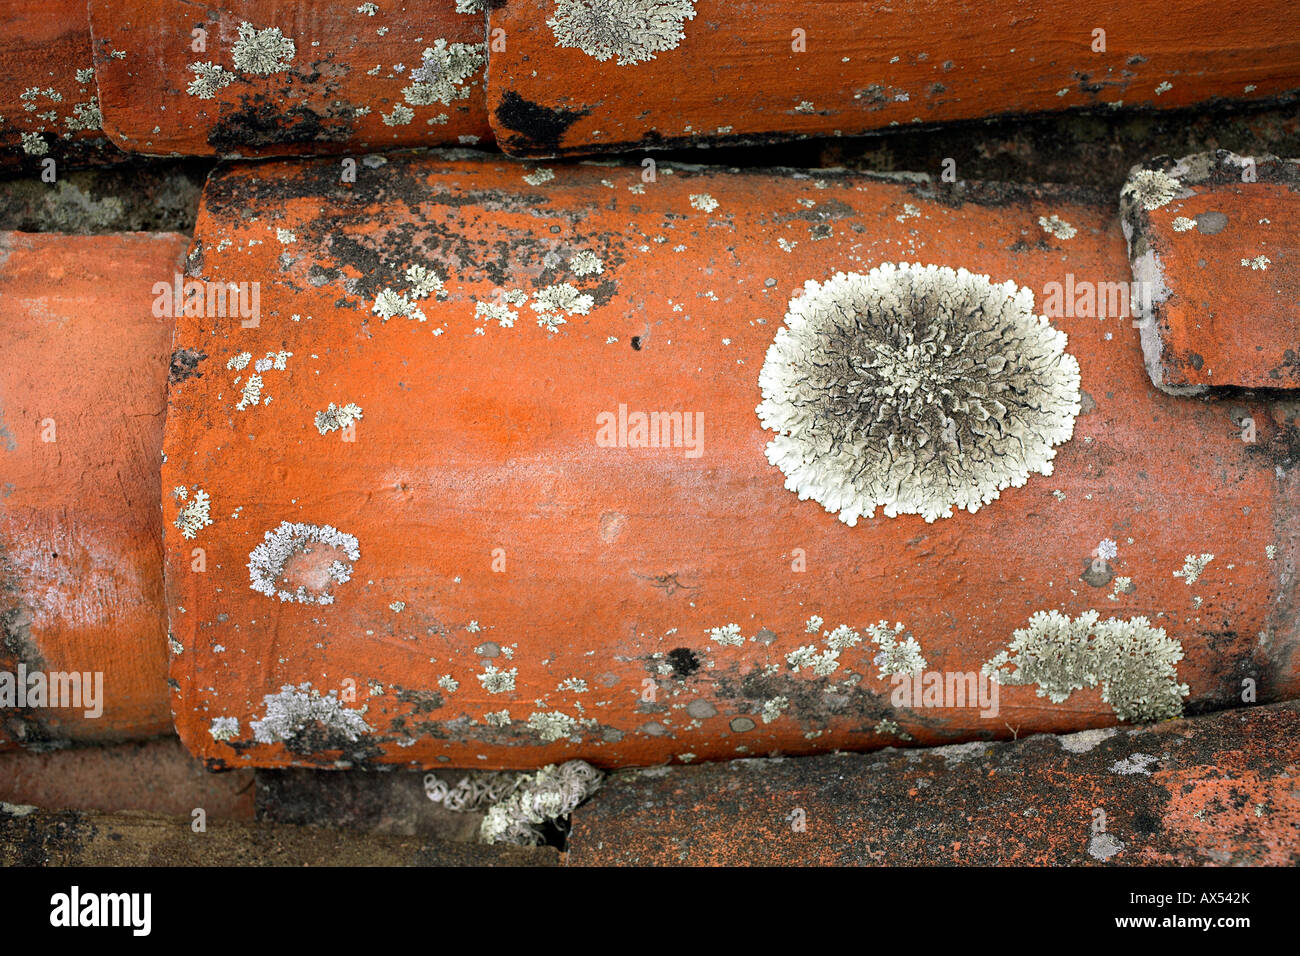 Terracotta tile with crustose lichen colonies Stock Photo